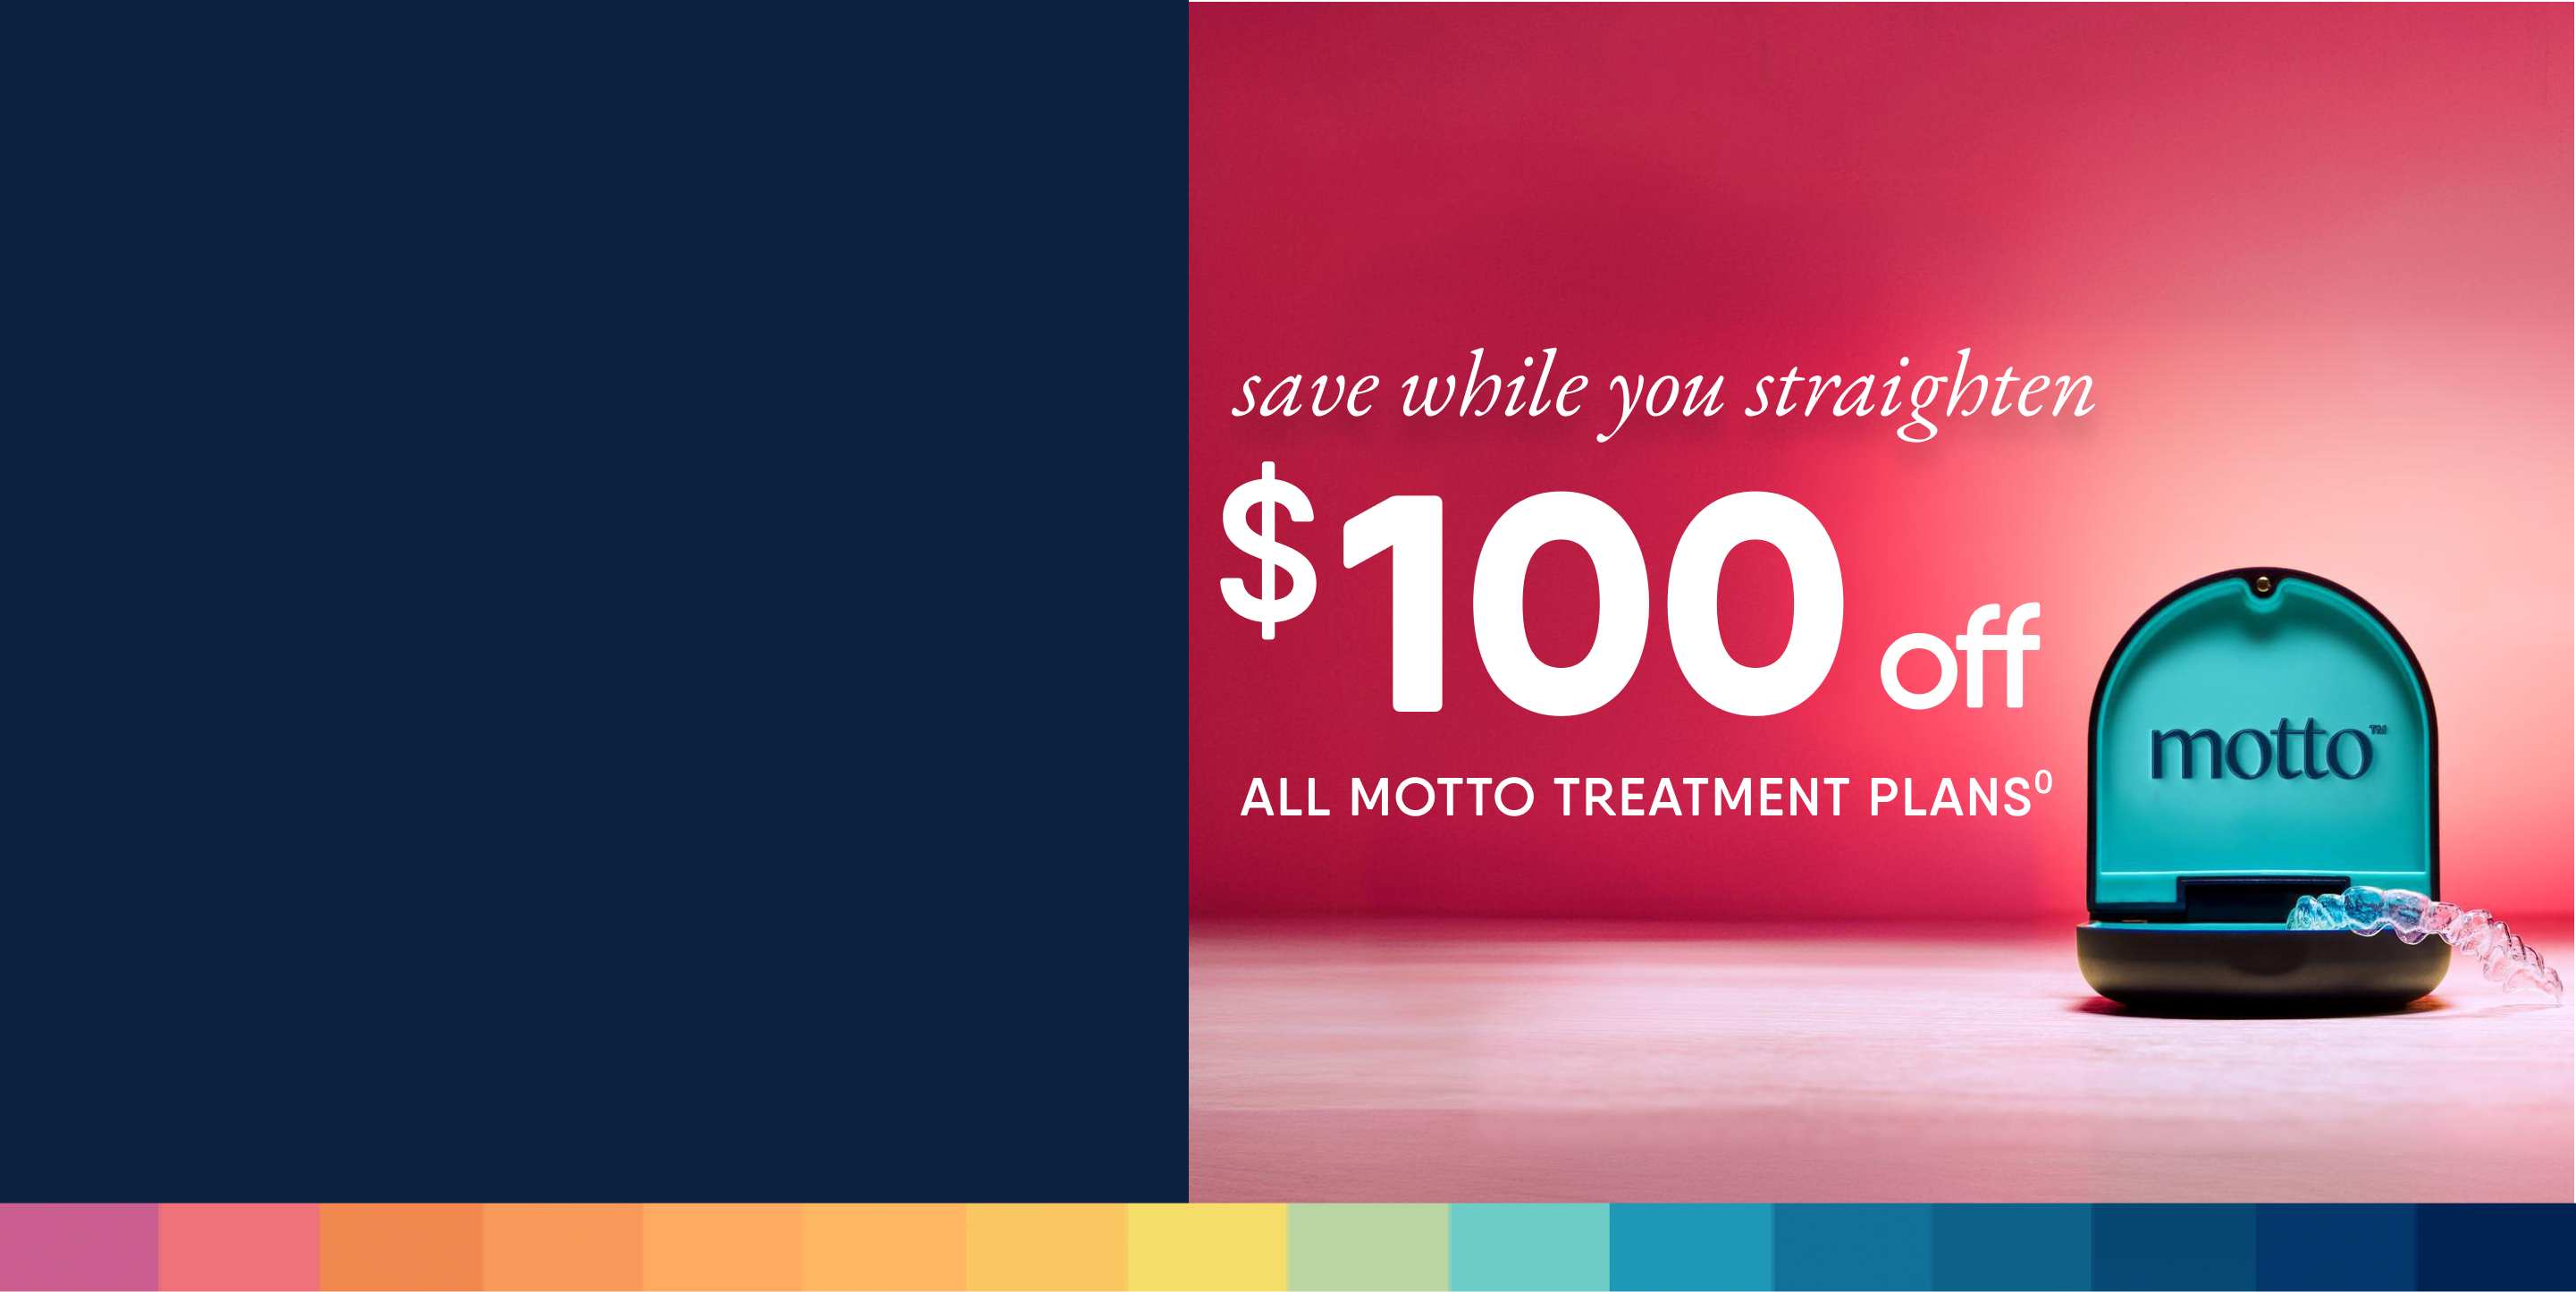 Save while you straighten. $100 off all Motto treatment plans. 